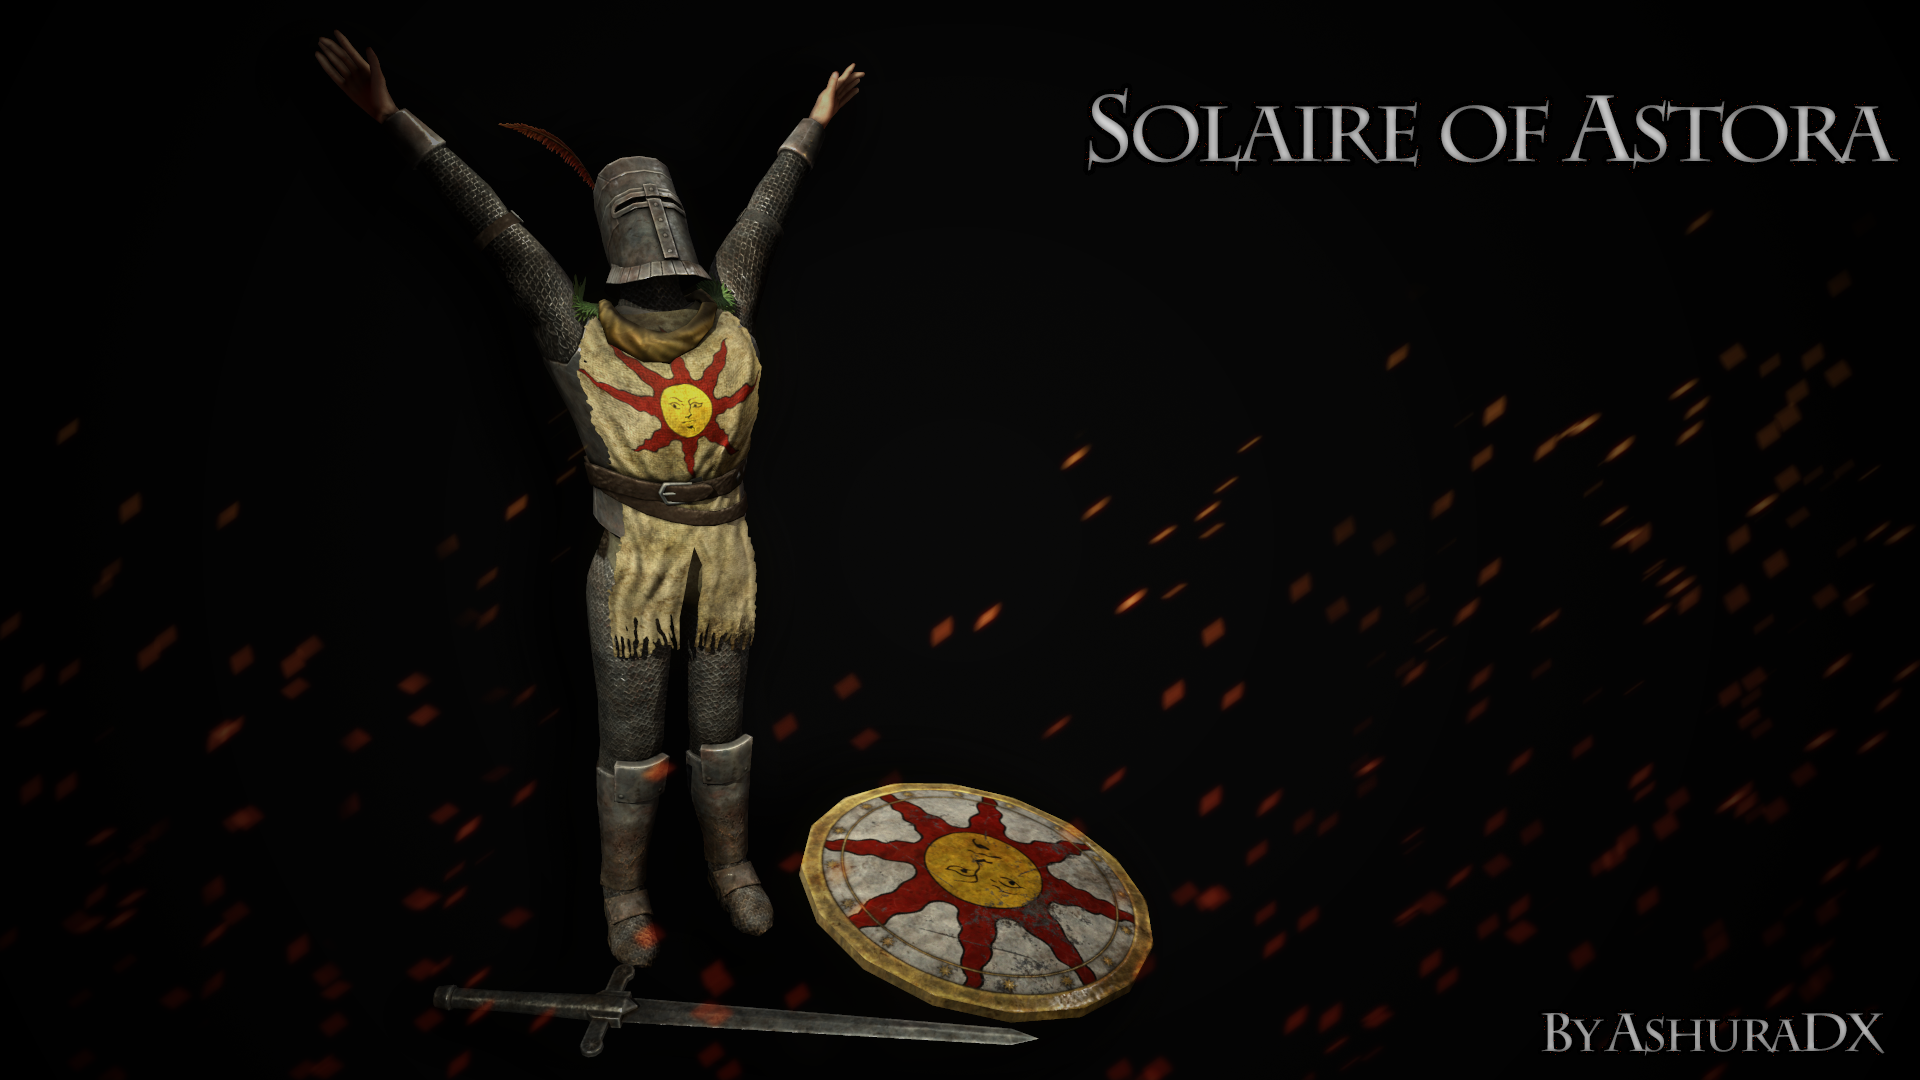 More information about "Solaire of Astora"